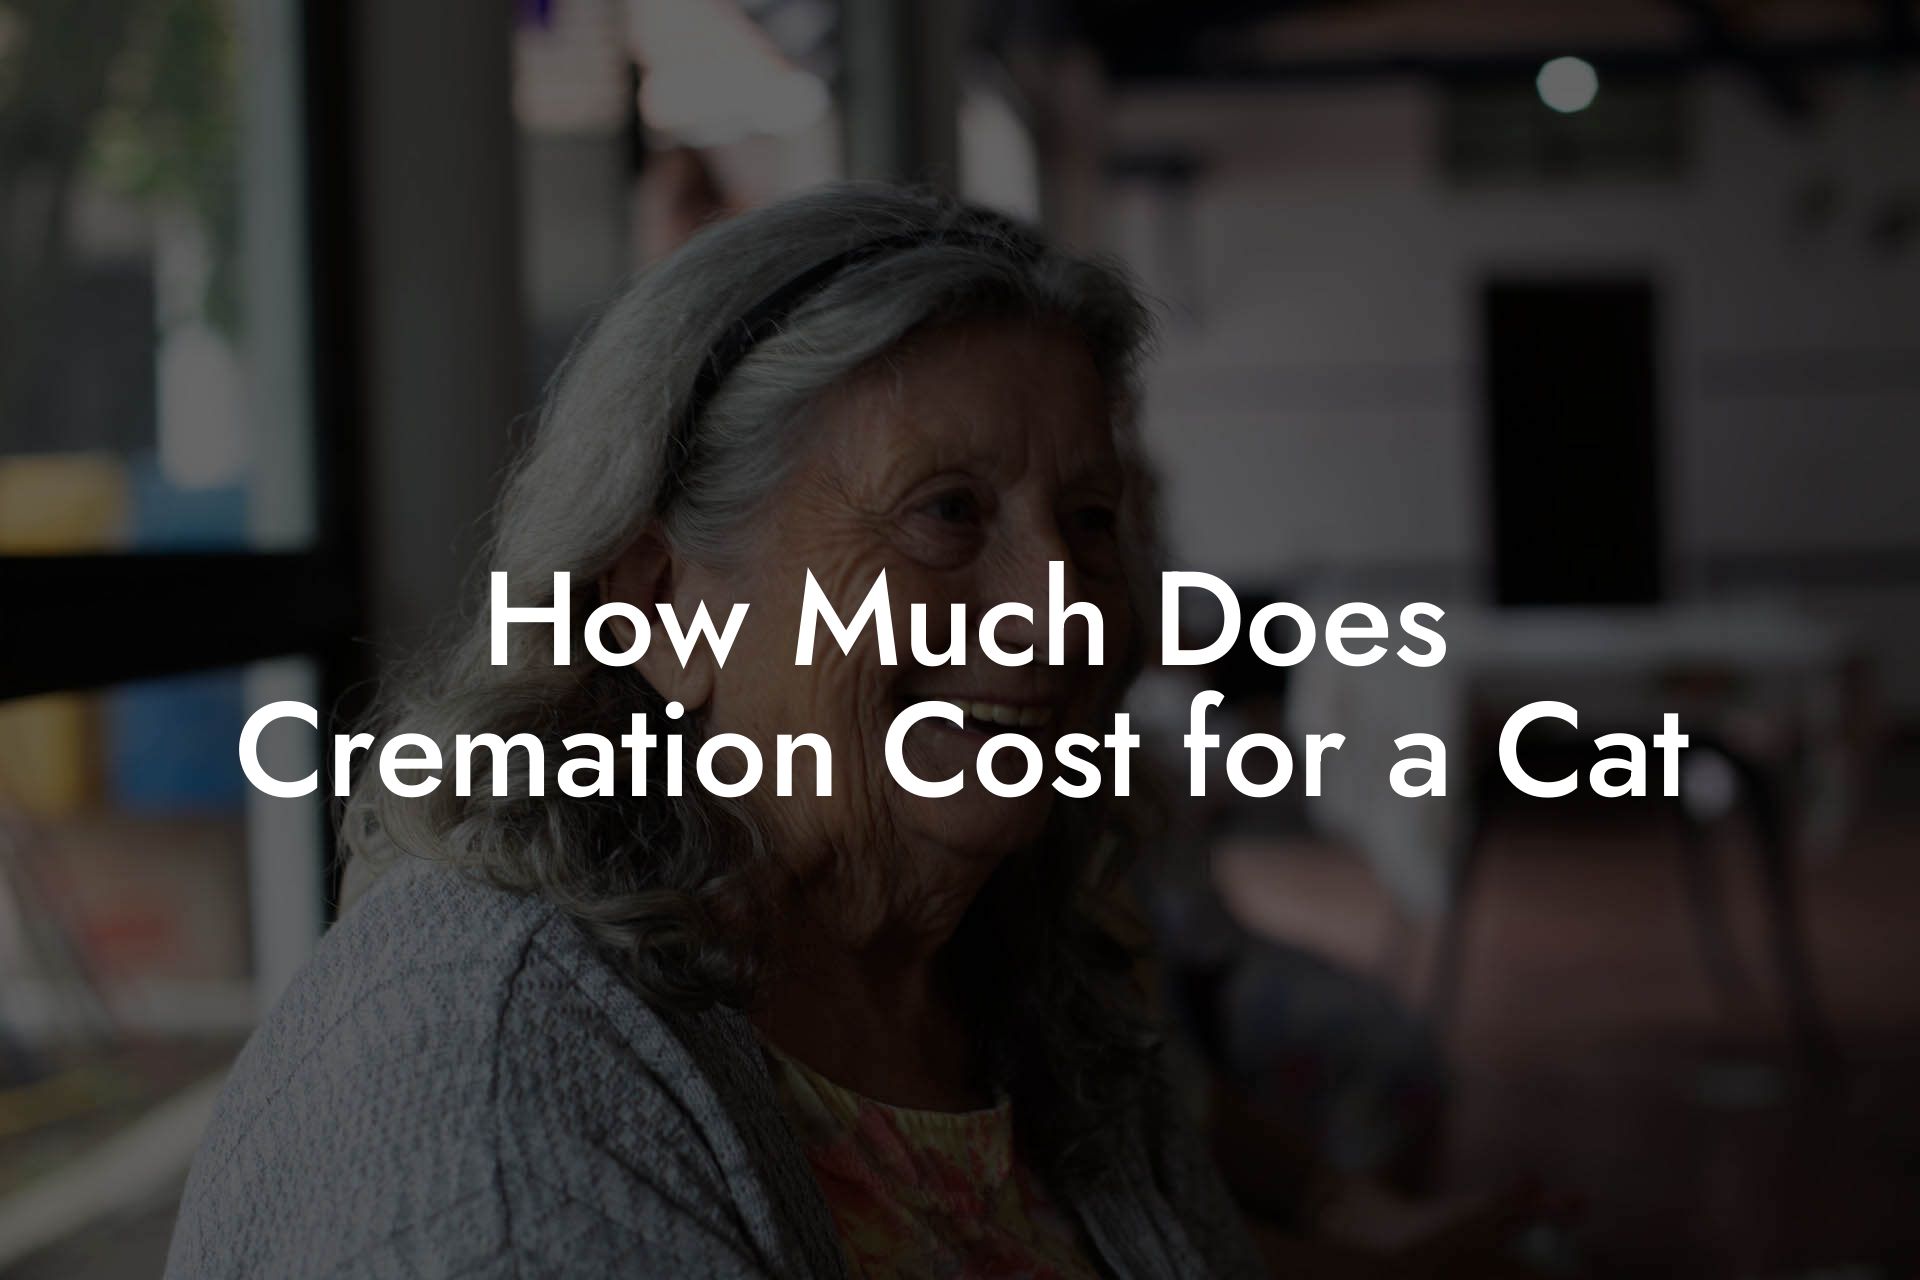 How Much Does Cremation Cost for a Cat